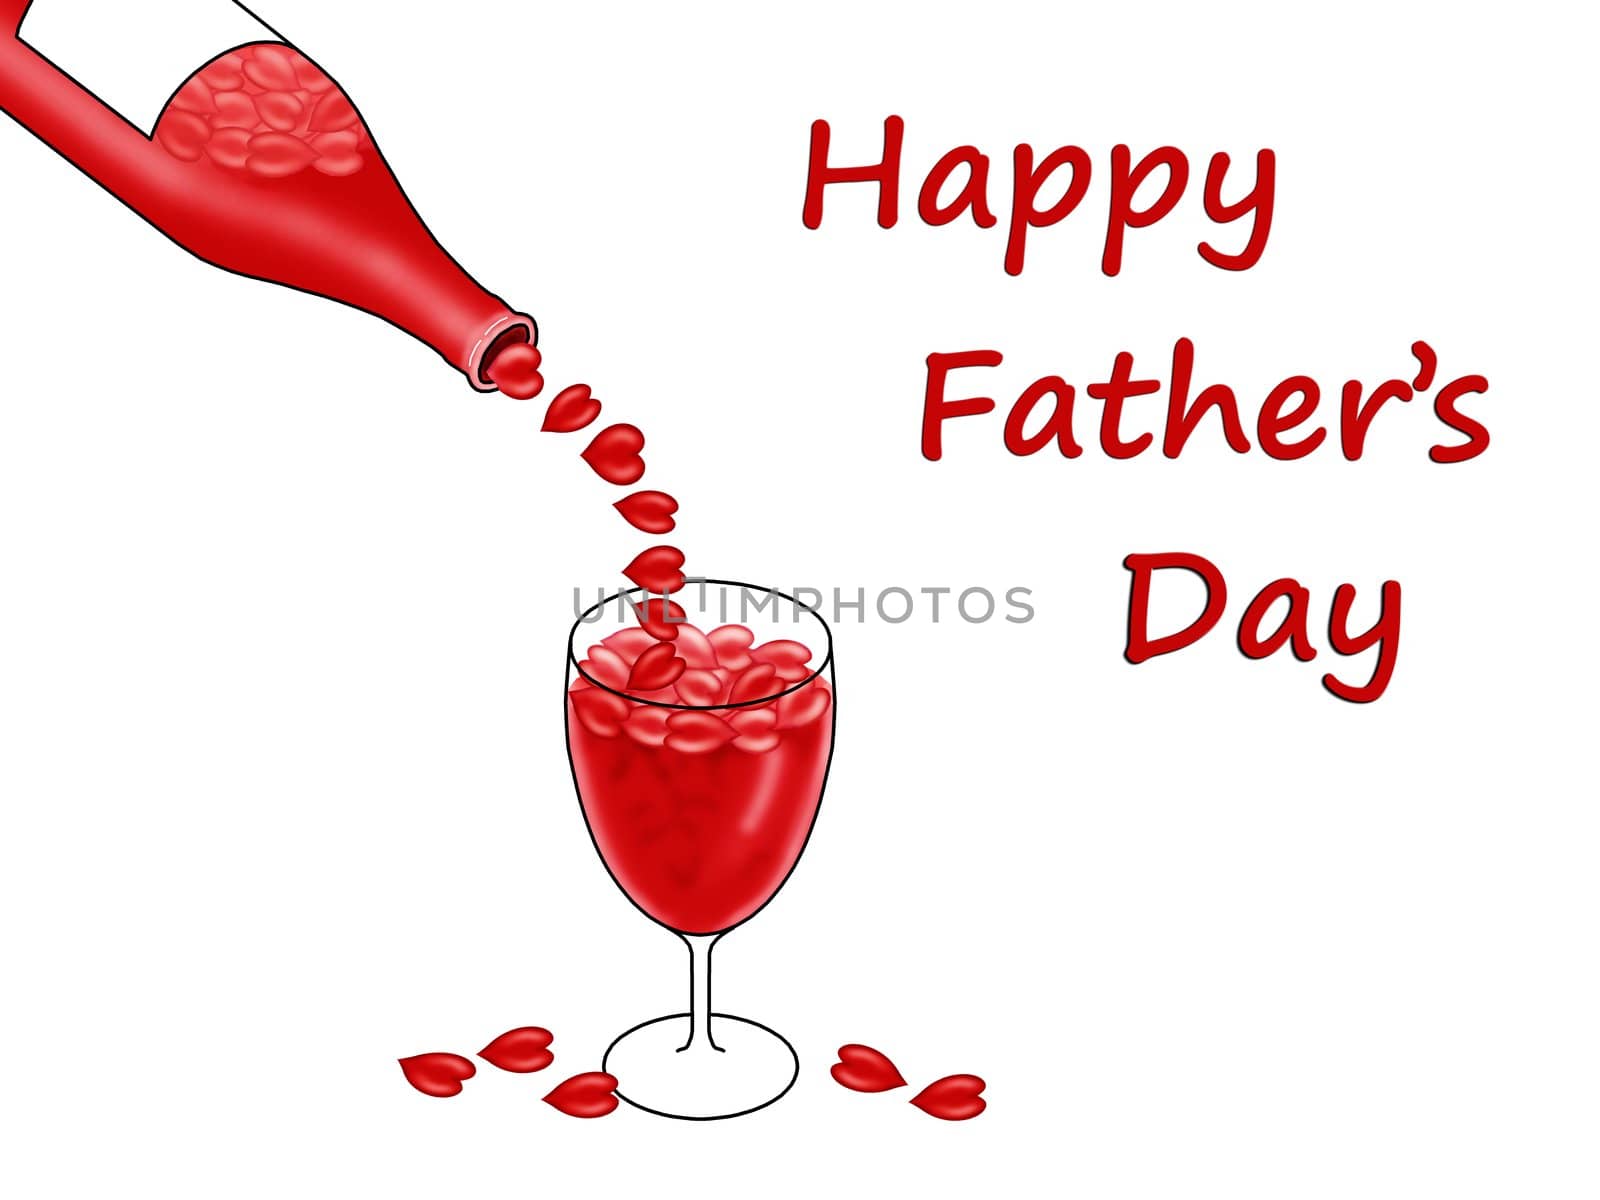 Father's Day card with a wine bottle and hearts by acremead